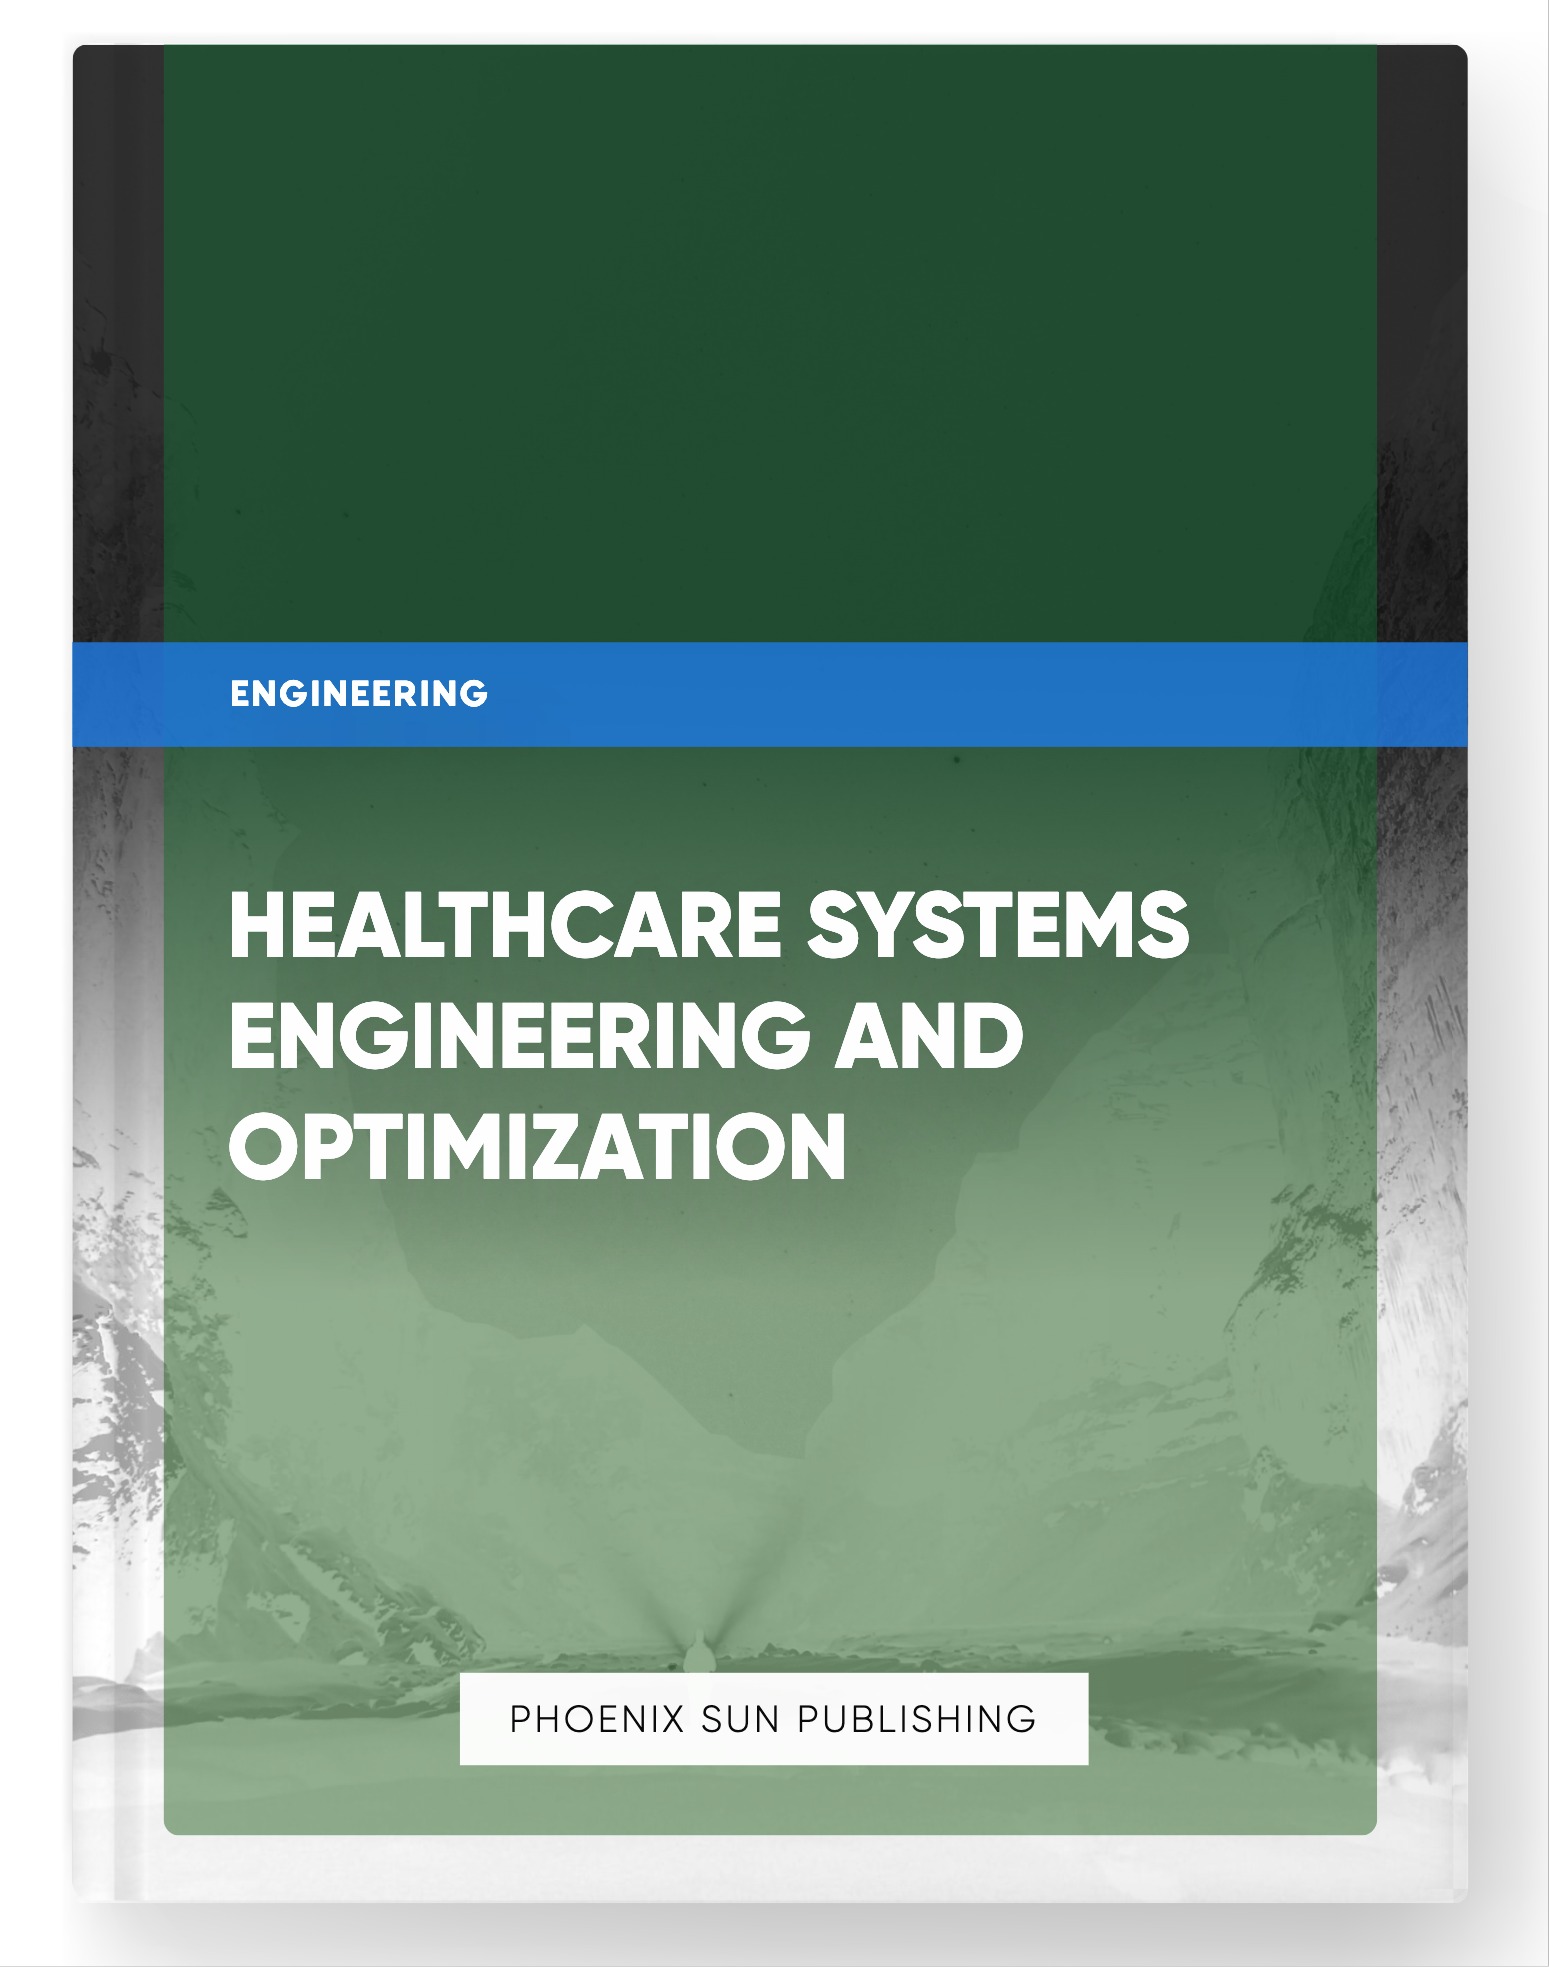 Healthcare Systems Engineering and Optimization